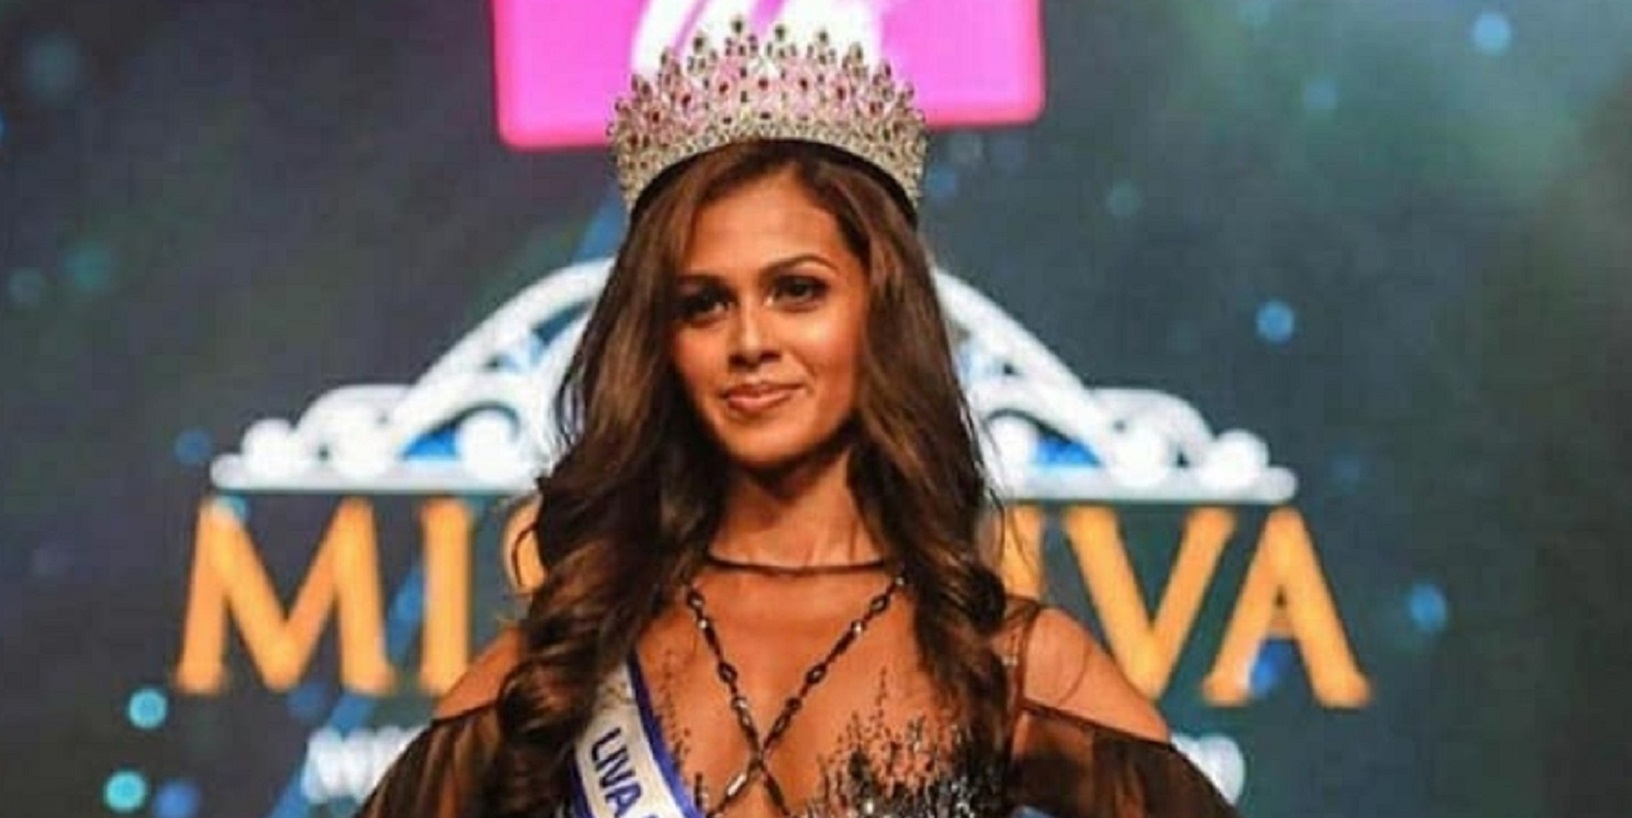 Meet Adline Castelino, The Third Runner Up In Miss Universe 2021 Pageant – Who Represented India This Year On the Platform